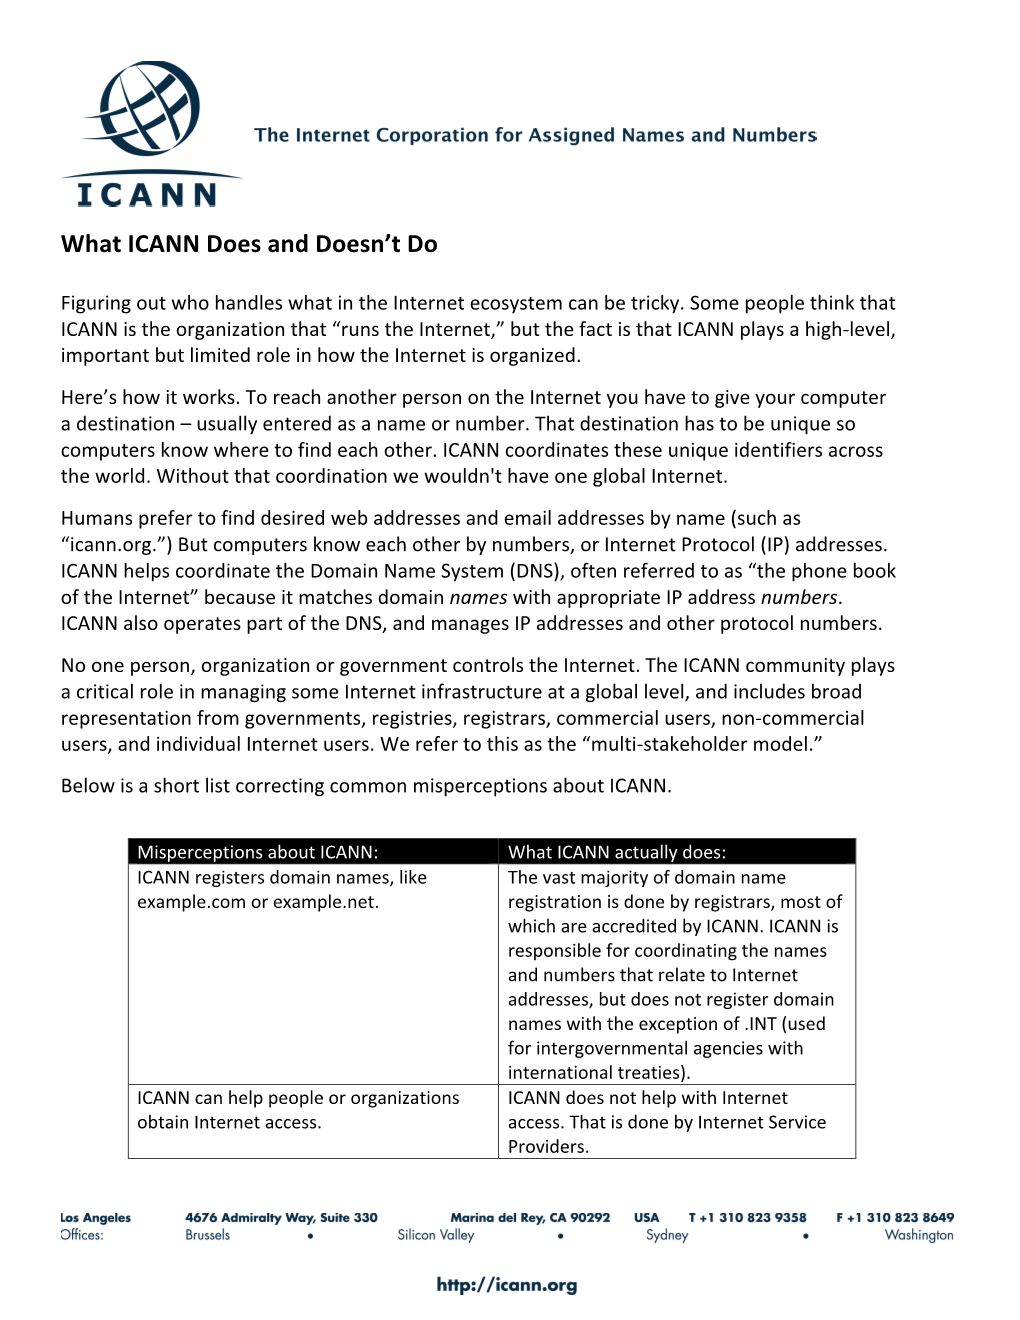 What ICANN Does and Doesn't Do